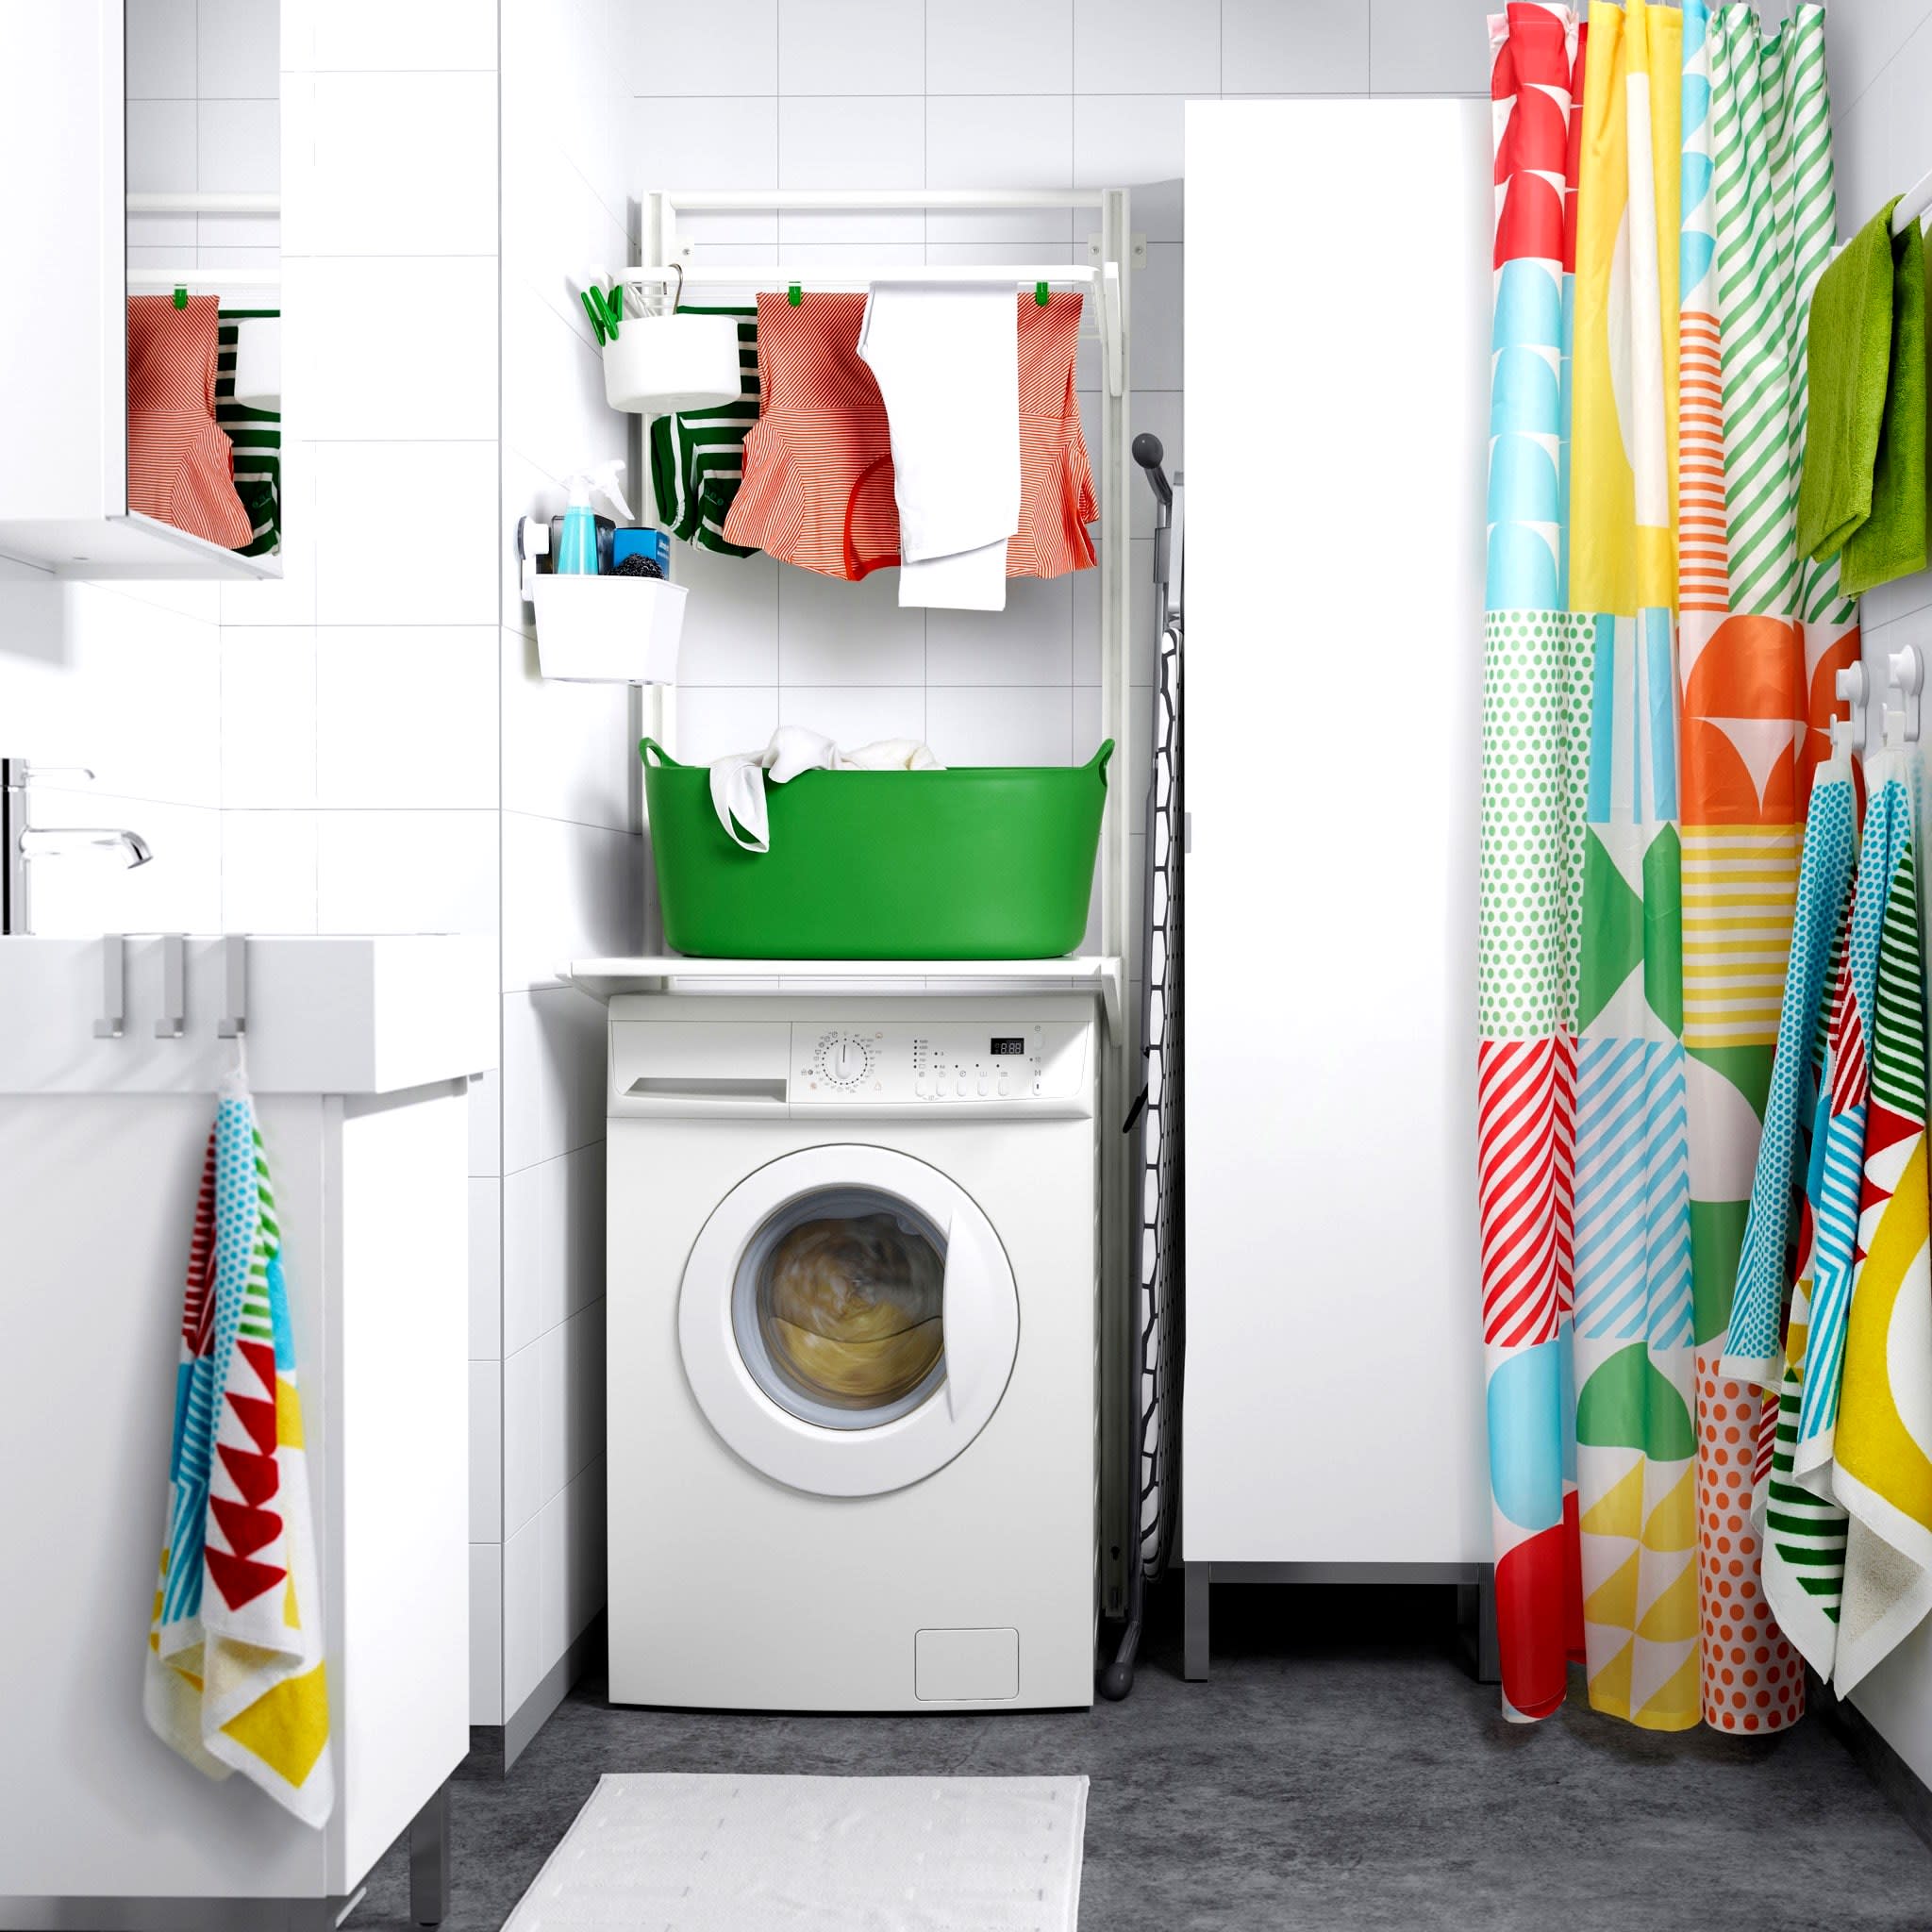 A gallery of laundry inspiration - IKEA